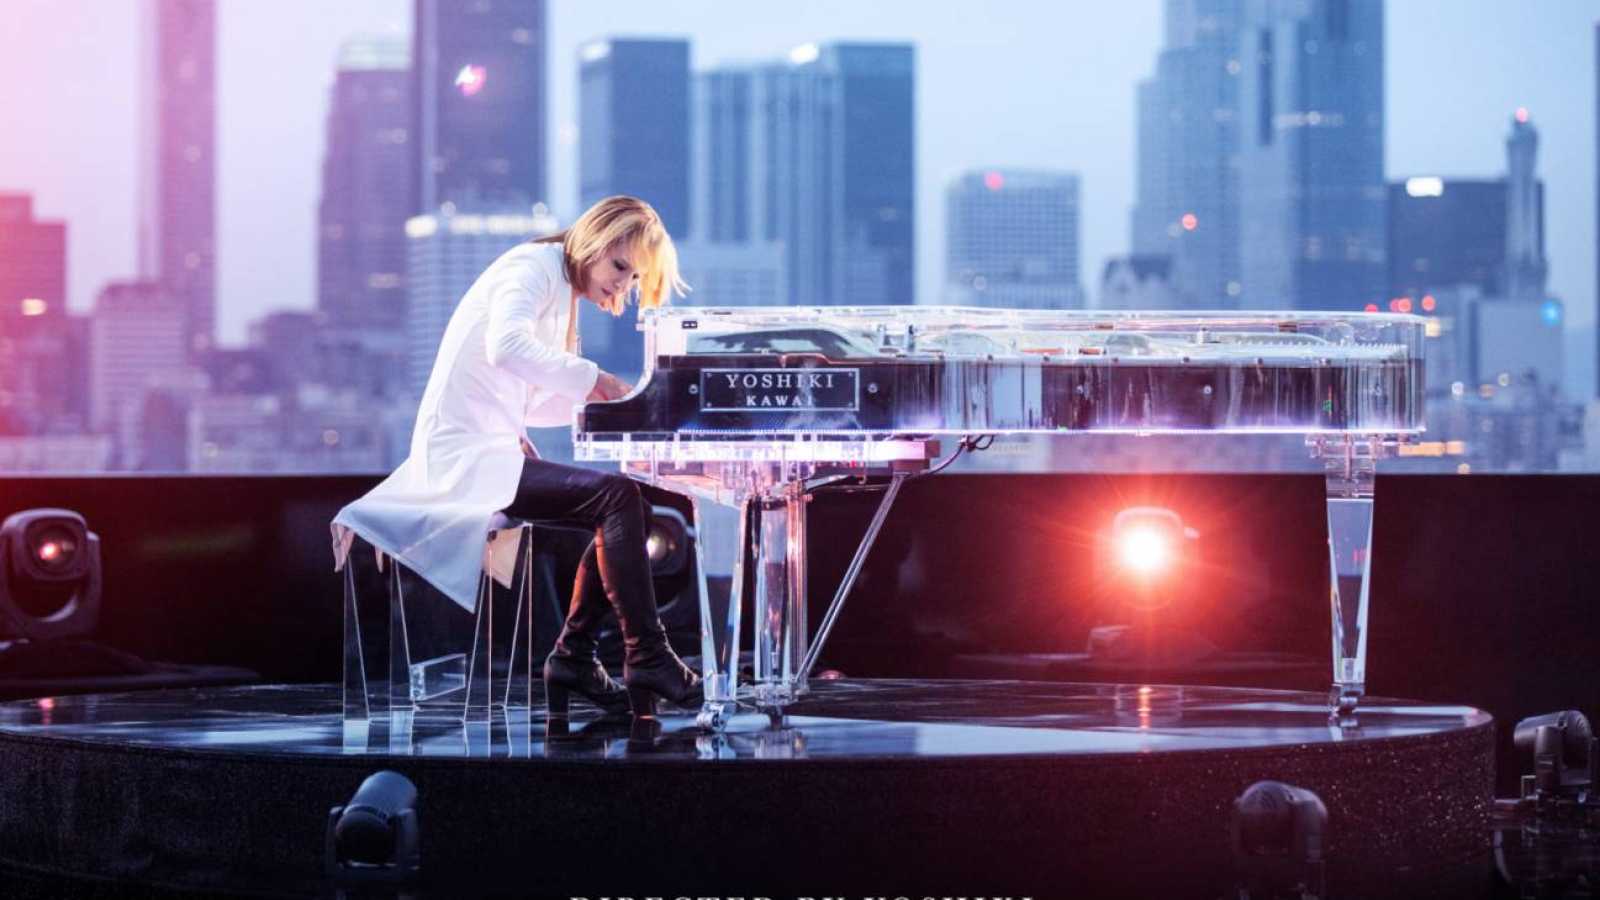 Theatrical Premiere Screenings Announced for "YOSHIKI: UNDER THE SKY" © YOSHIKI. All rights reserved.